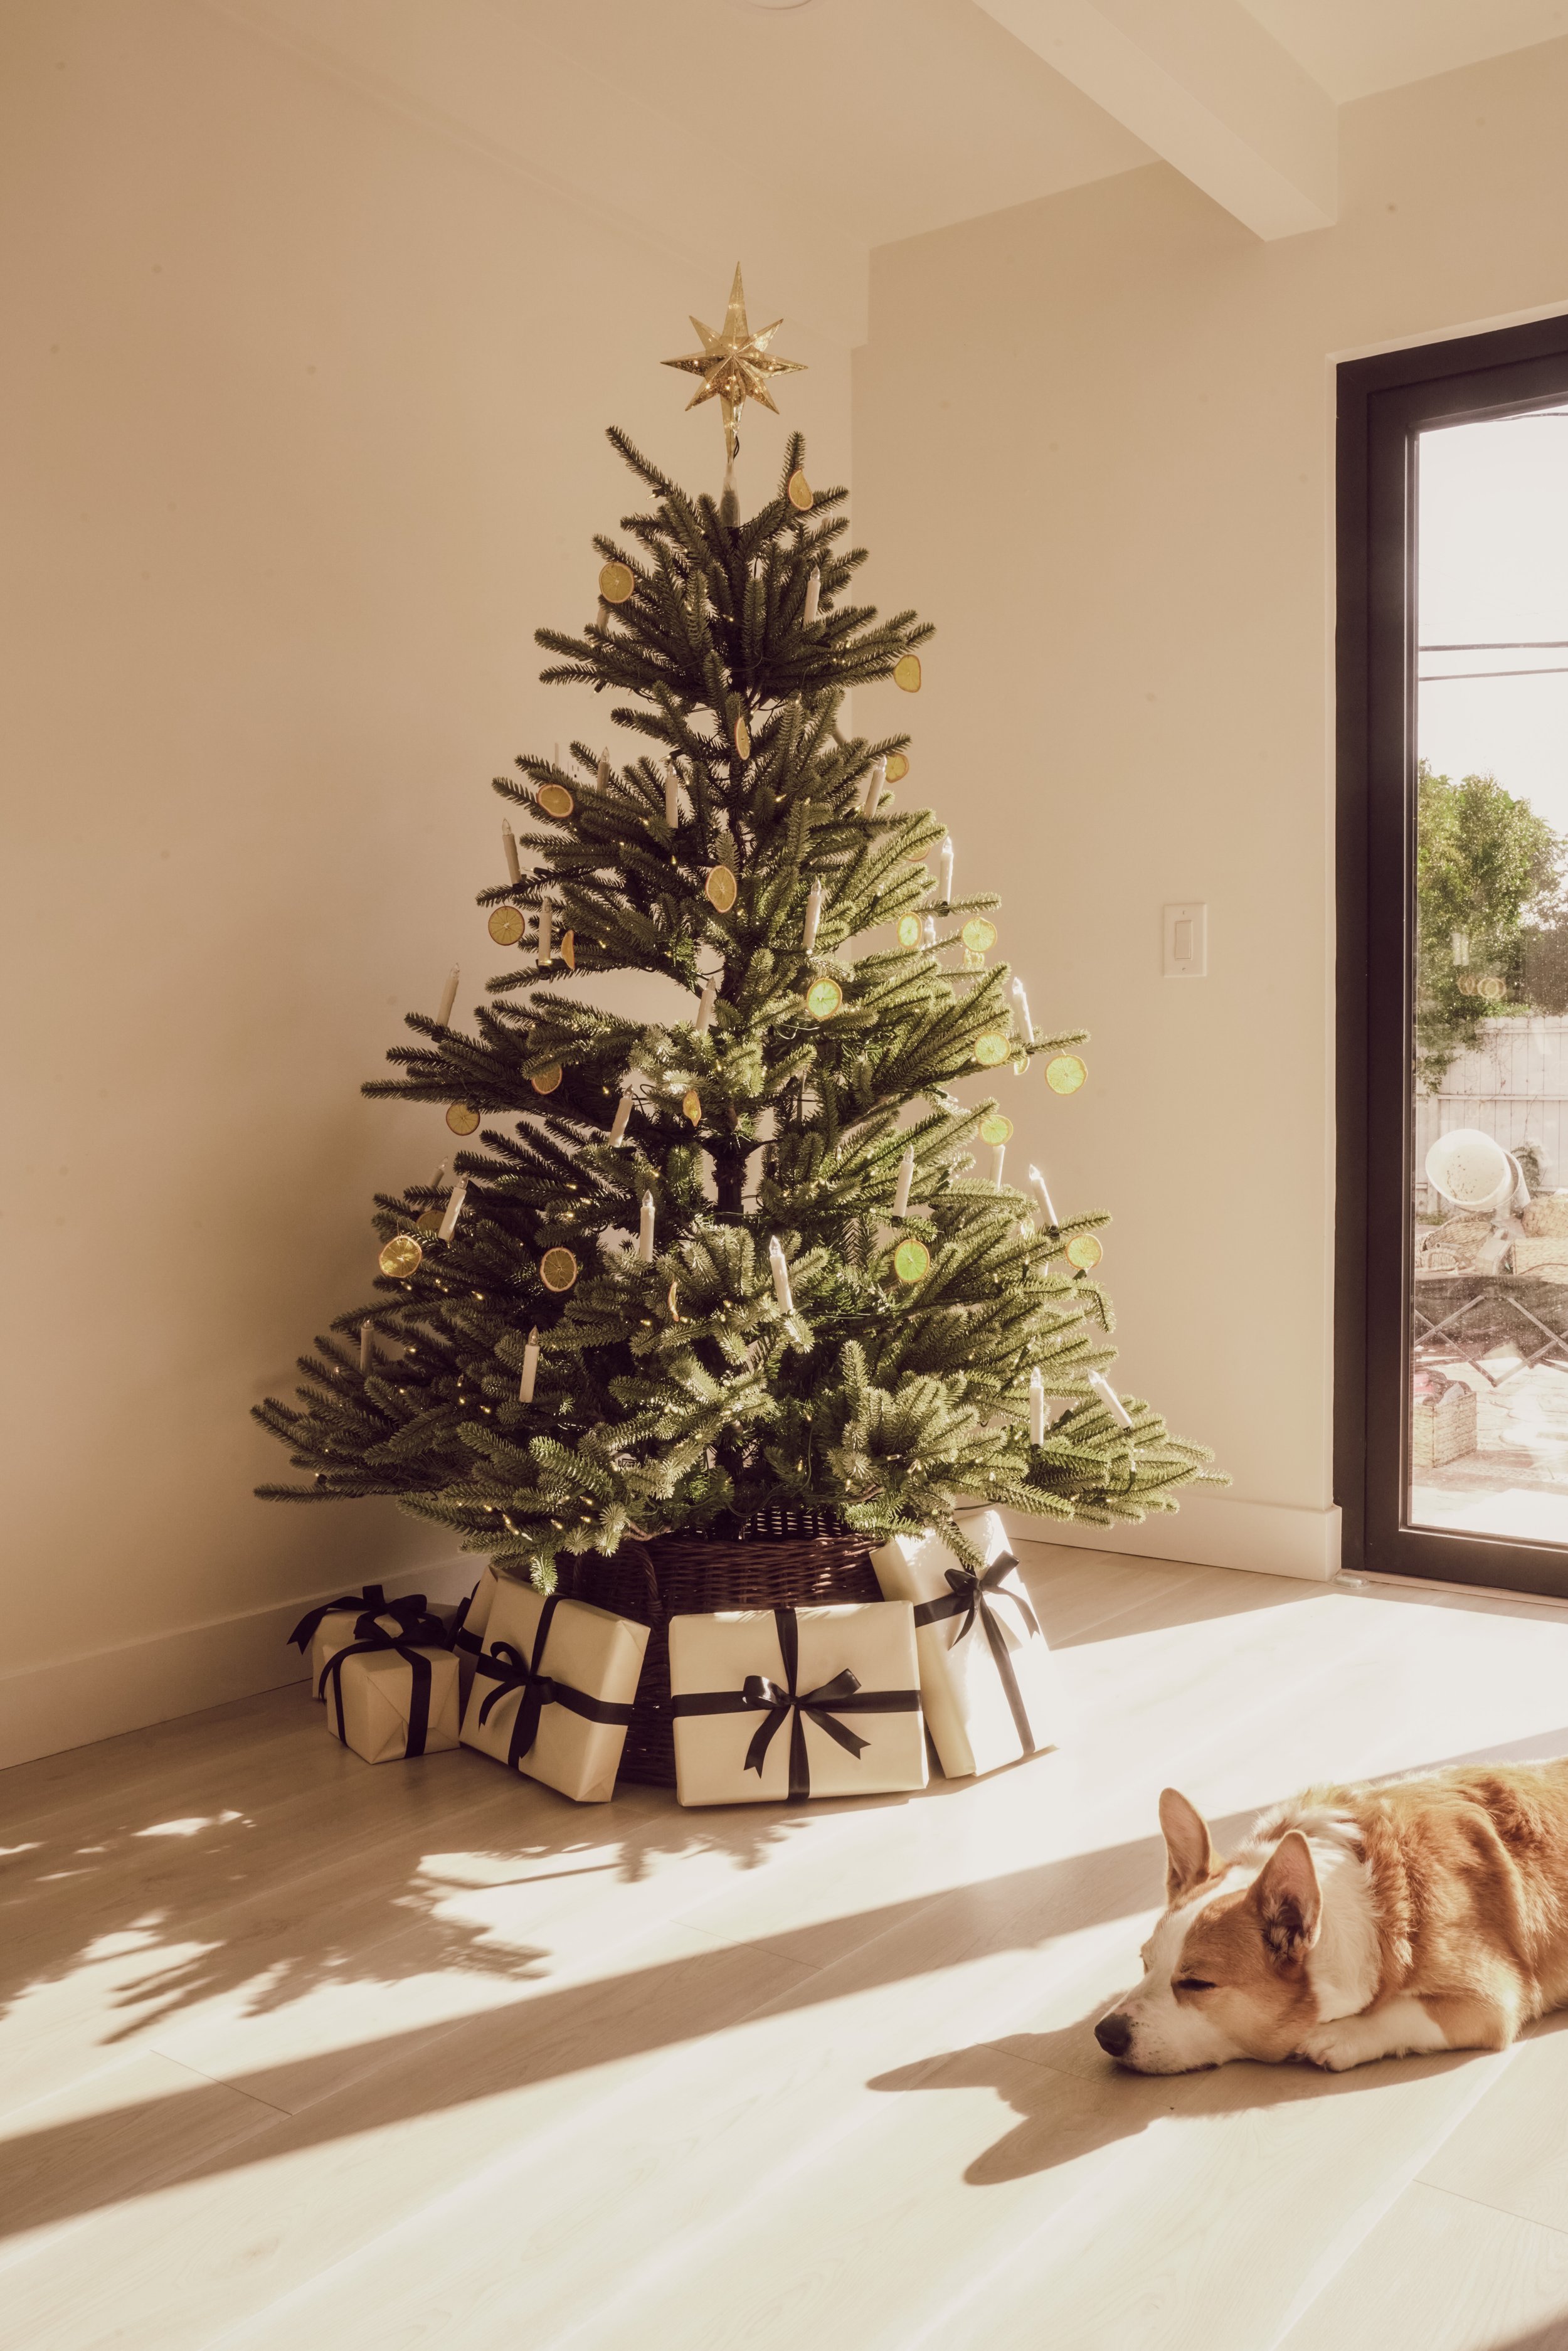 I'm an interior designer and having one Christmas tree isn't enough anymore